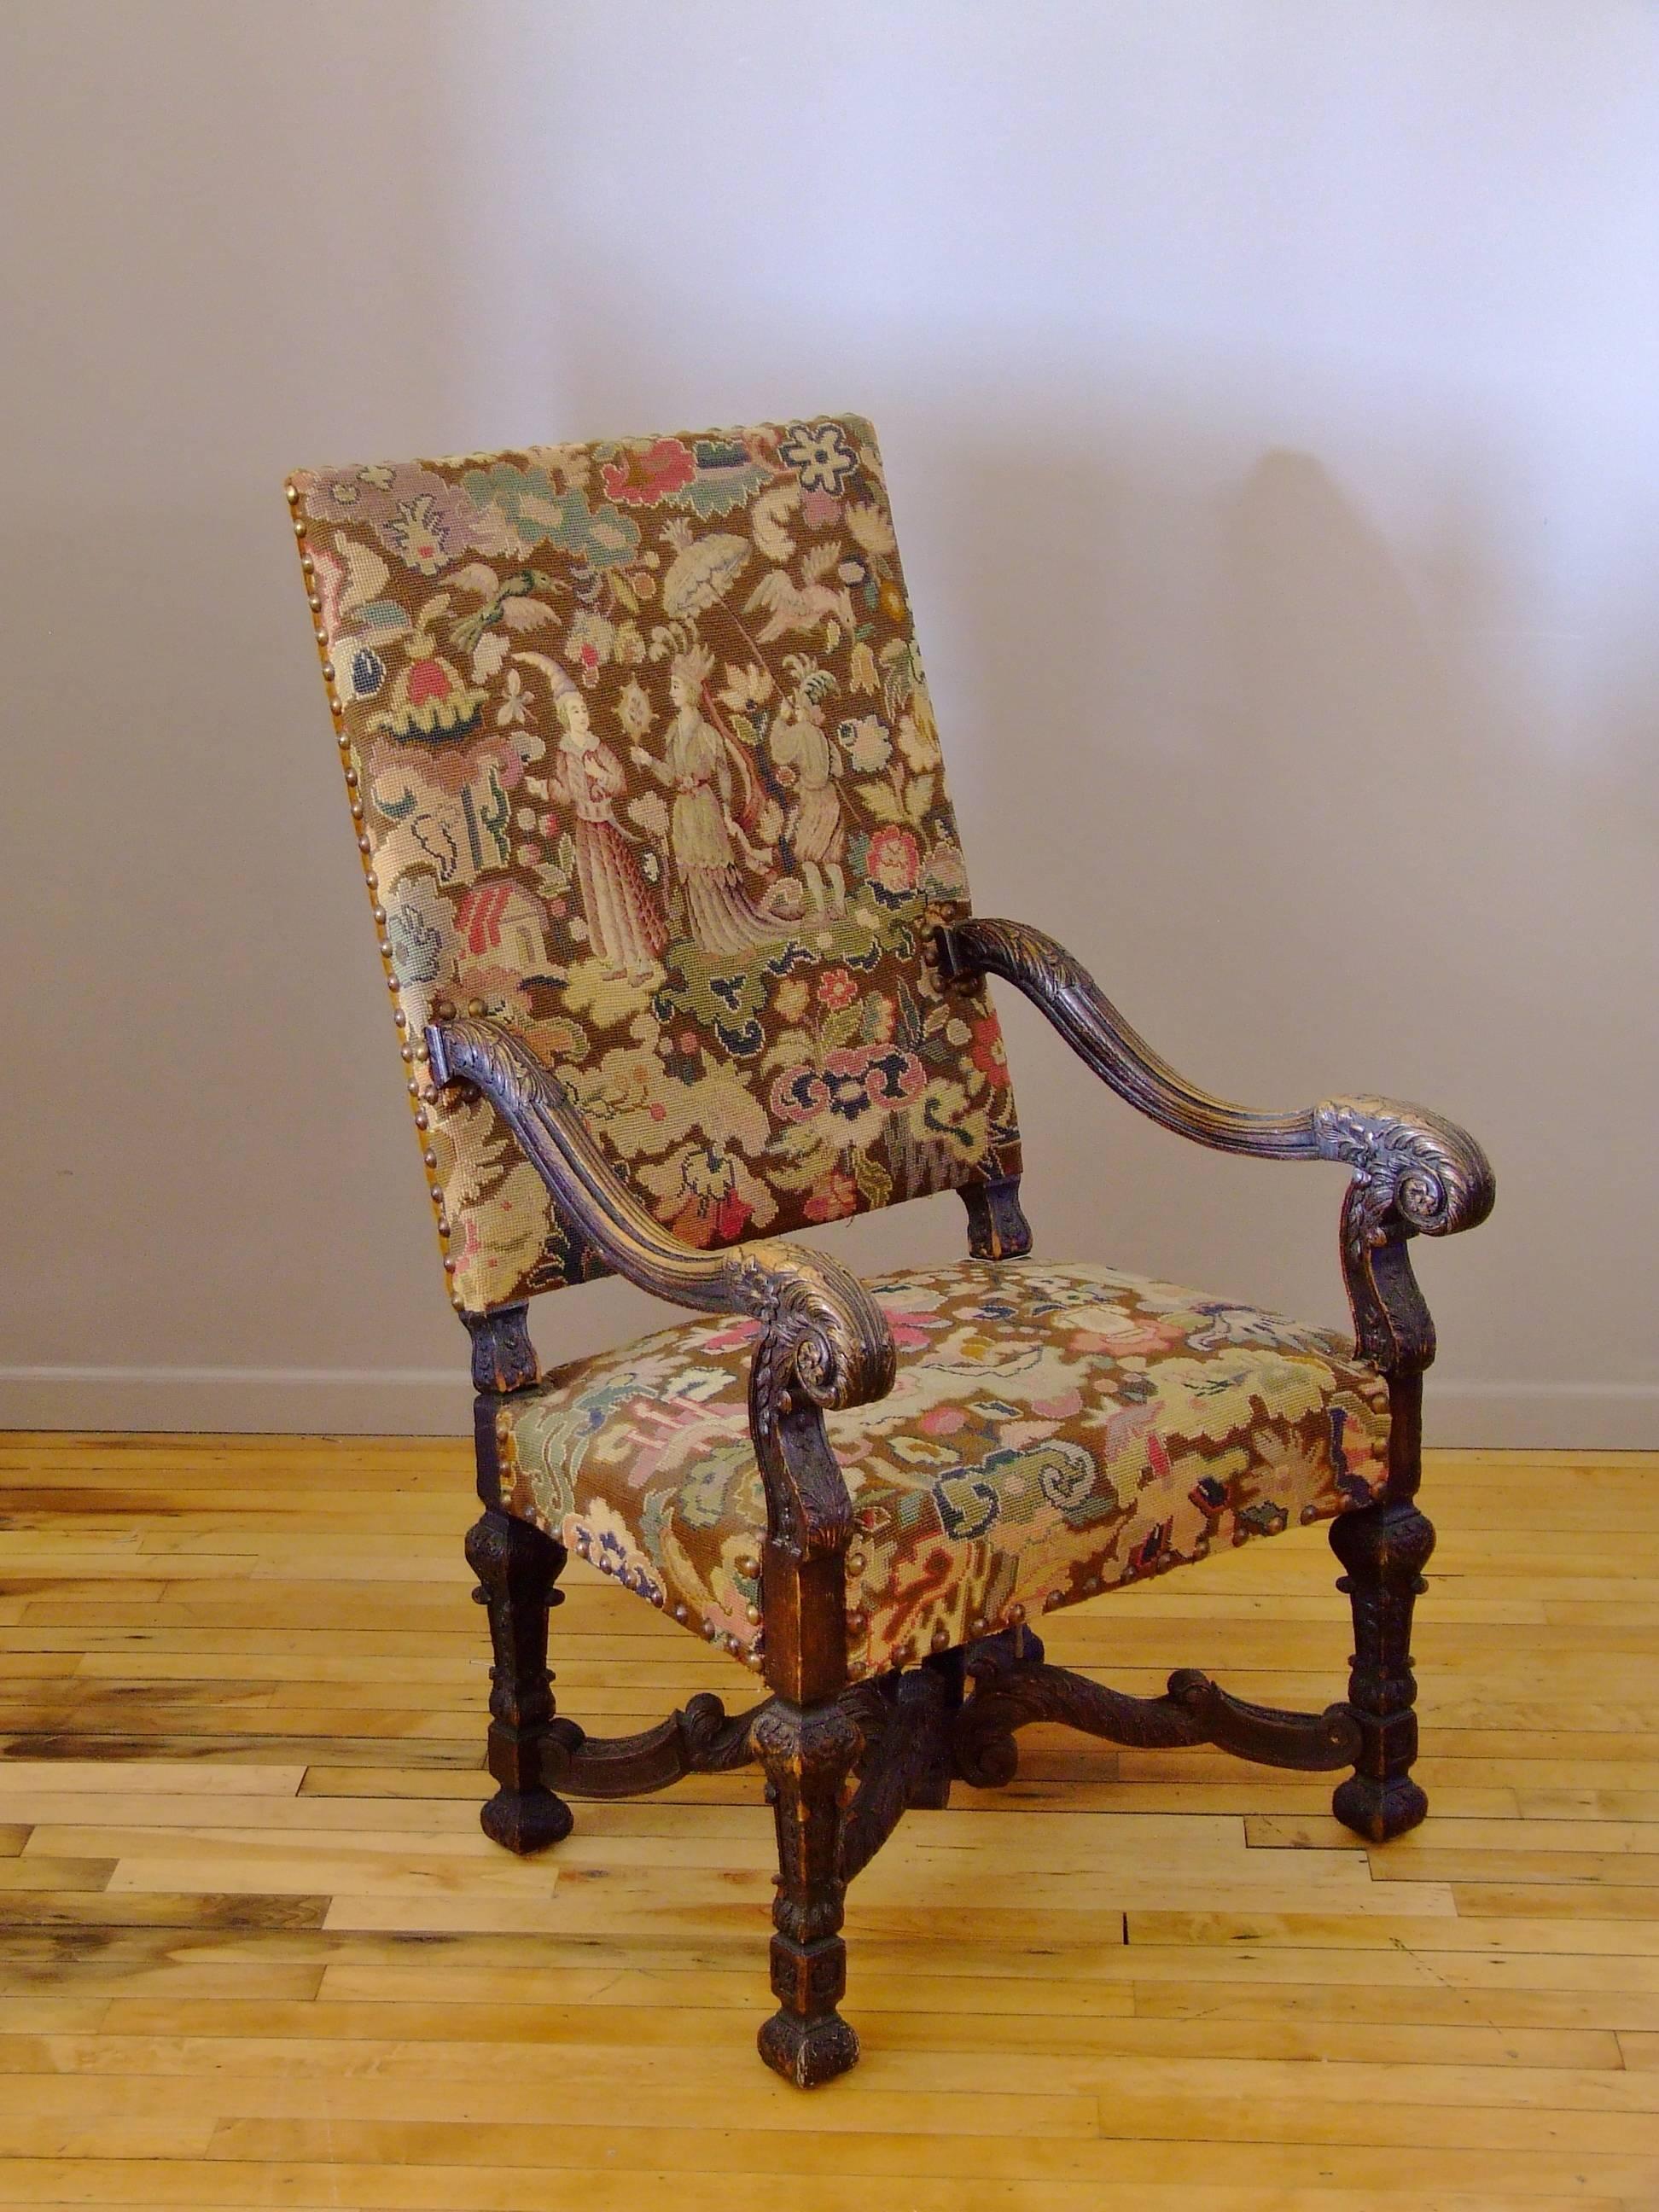 Outstanding French needlepoint chair with original needlepoint upholstery. The details on the petitpoint are the work of a very accomplished needlework artist. It is still in very good condition and the color is very strong. The needlepoint was